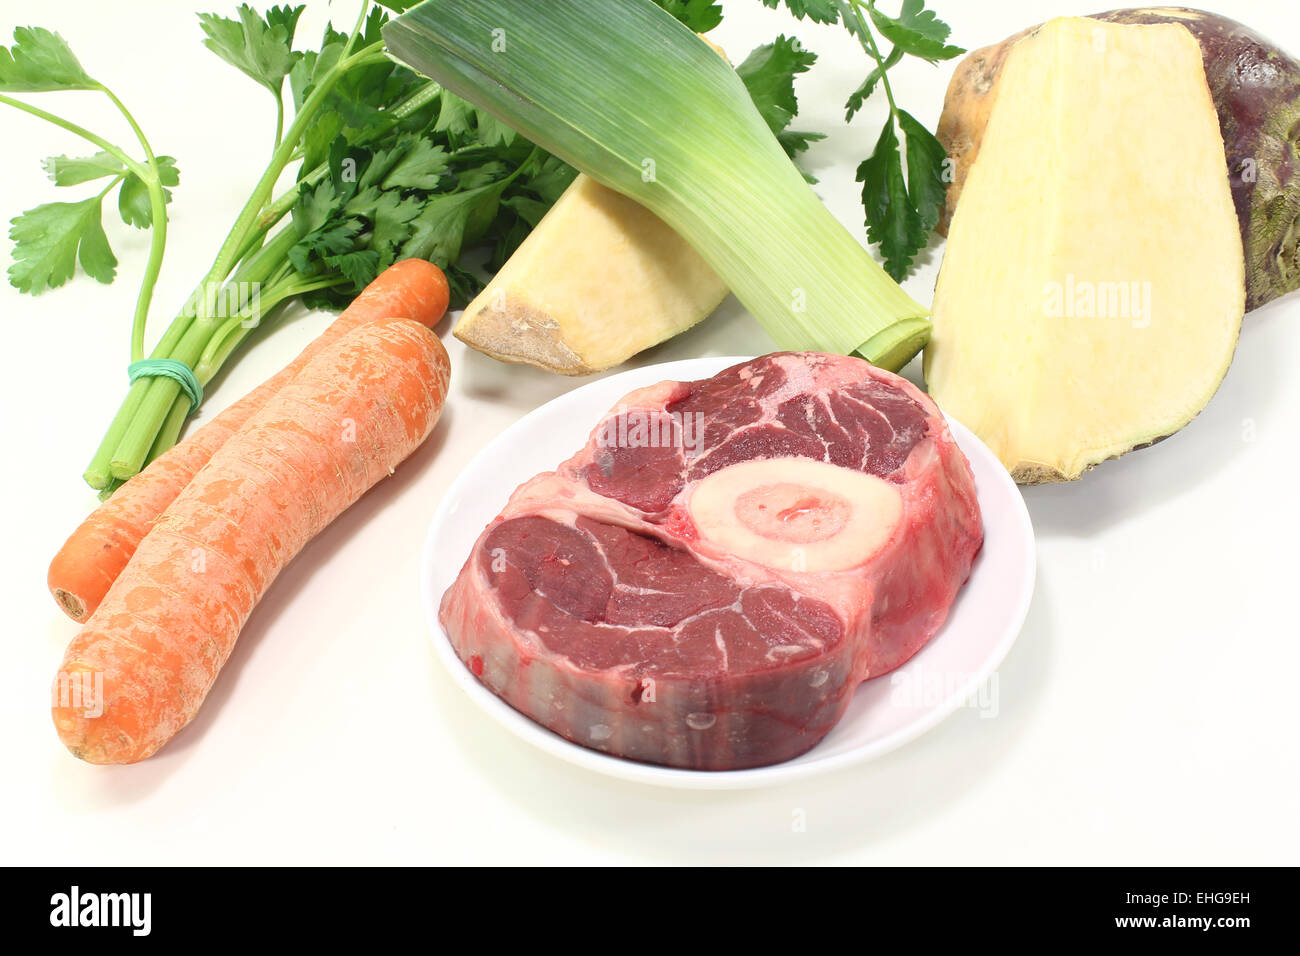 fresh raw leg slice with soup vegetables Stock Photo